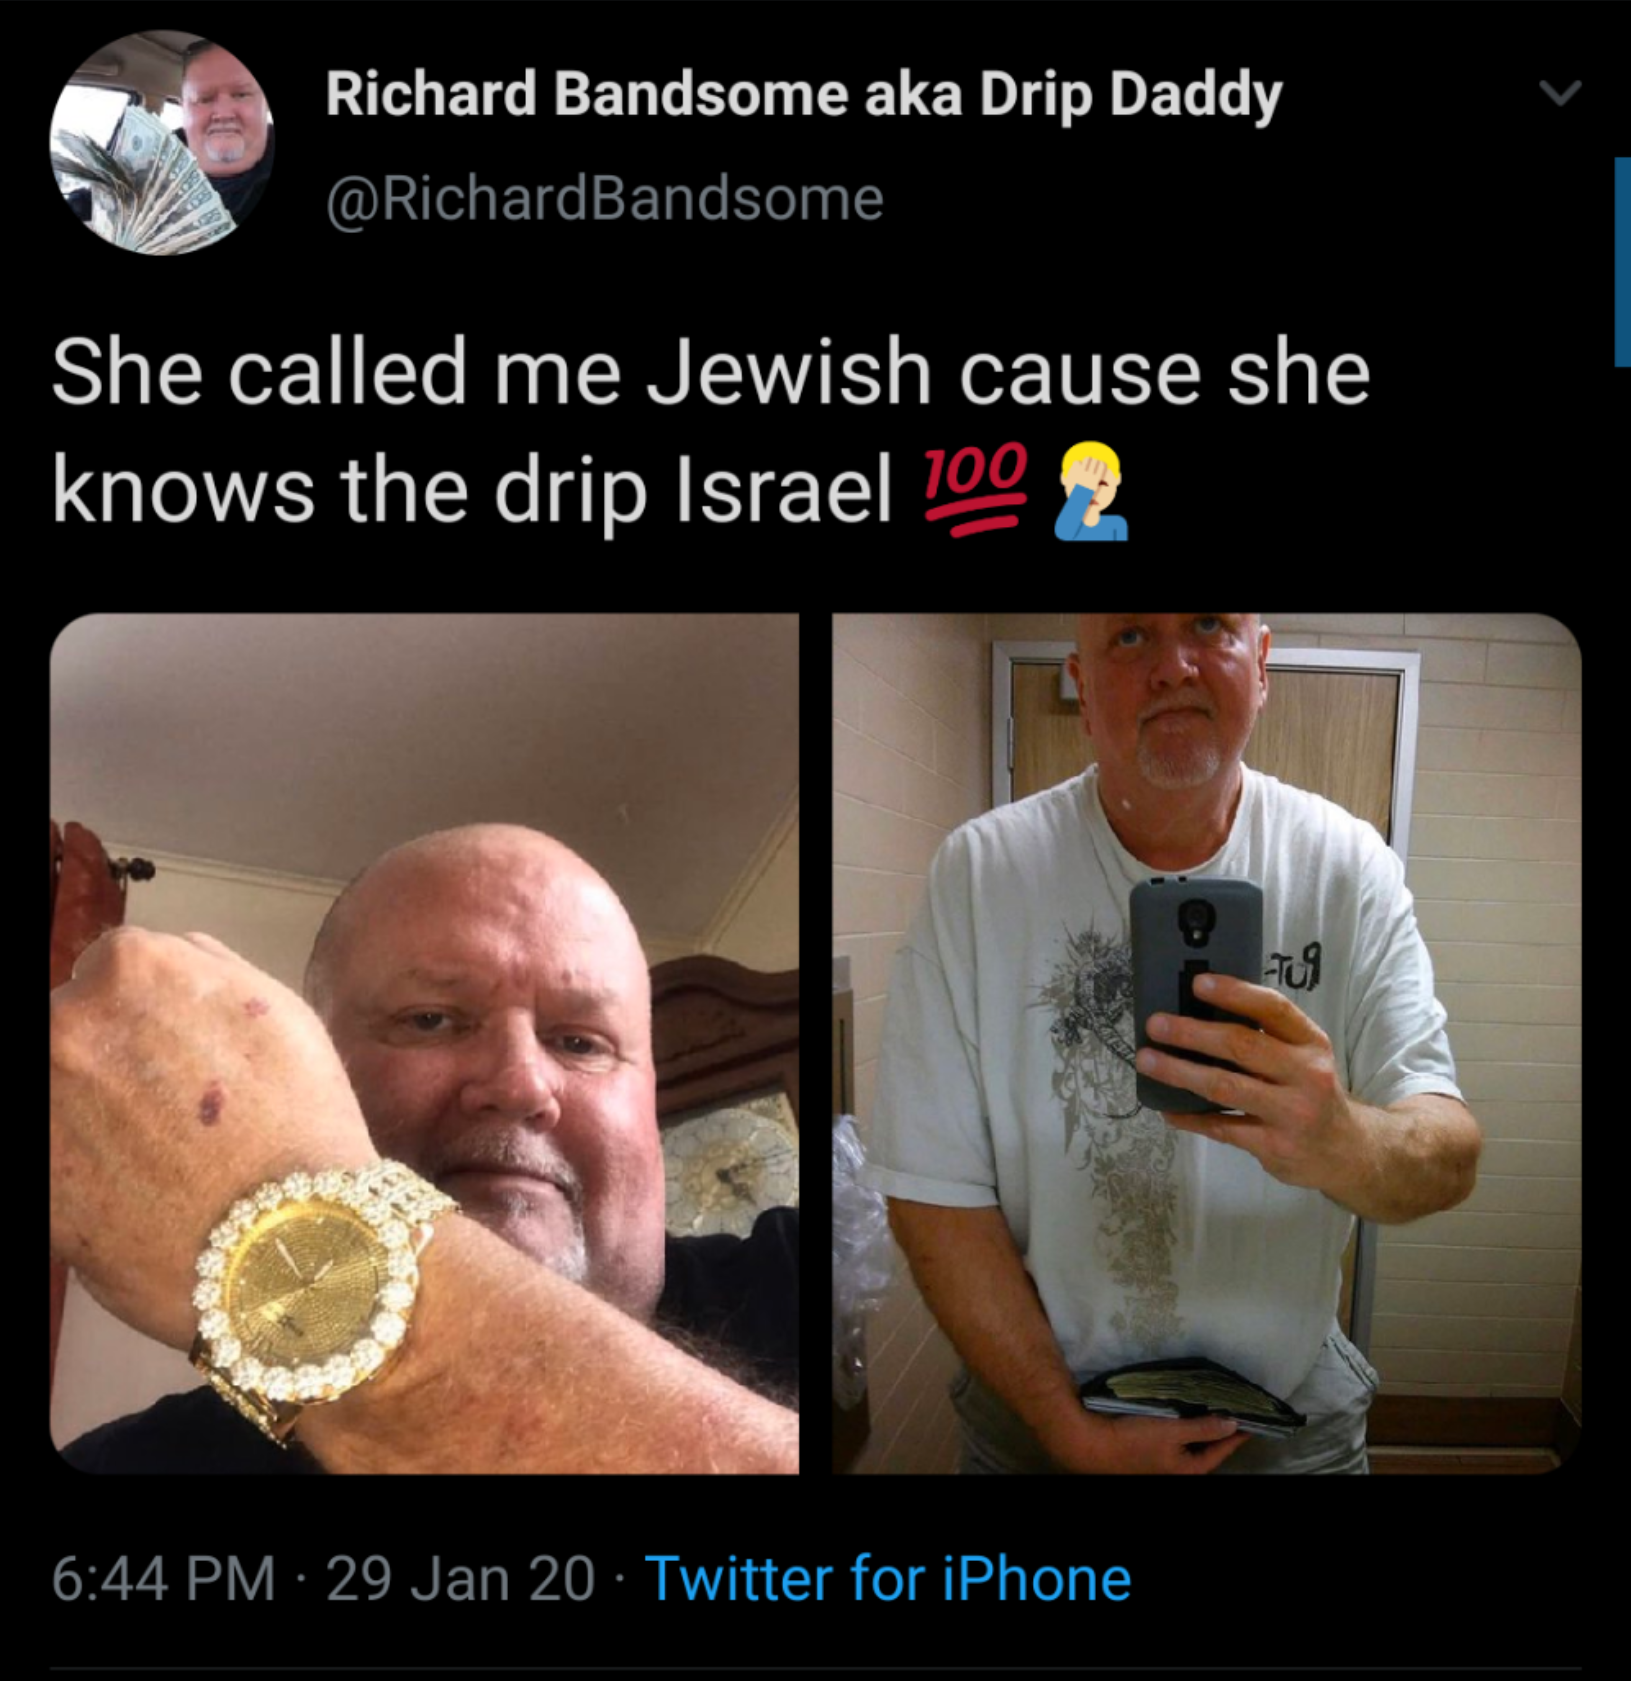 photo caption - Richard Bandsome aka Drip Daddy She called me Jewish cause she knows the drip Israel 1002 29 Jan 20. Twitter for iPhone